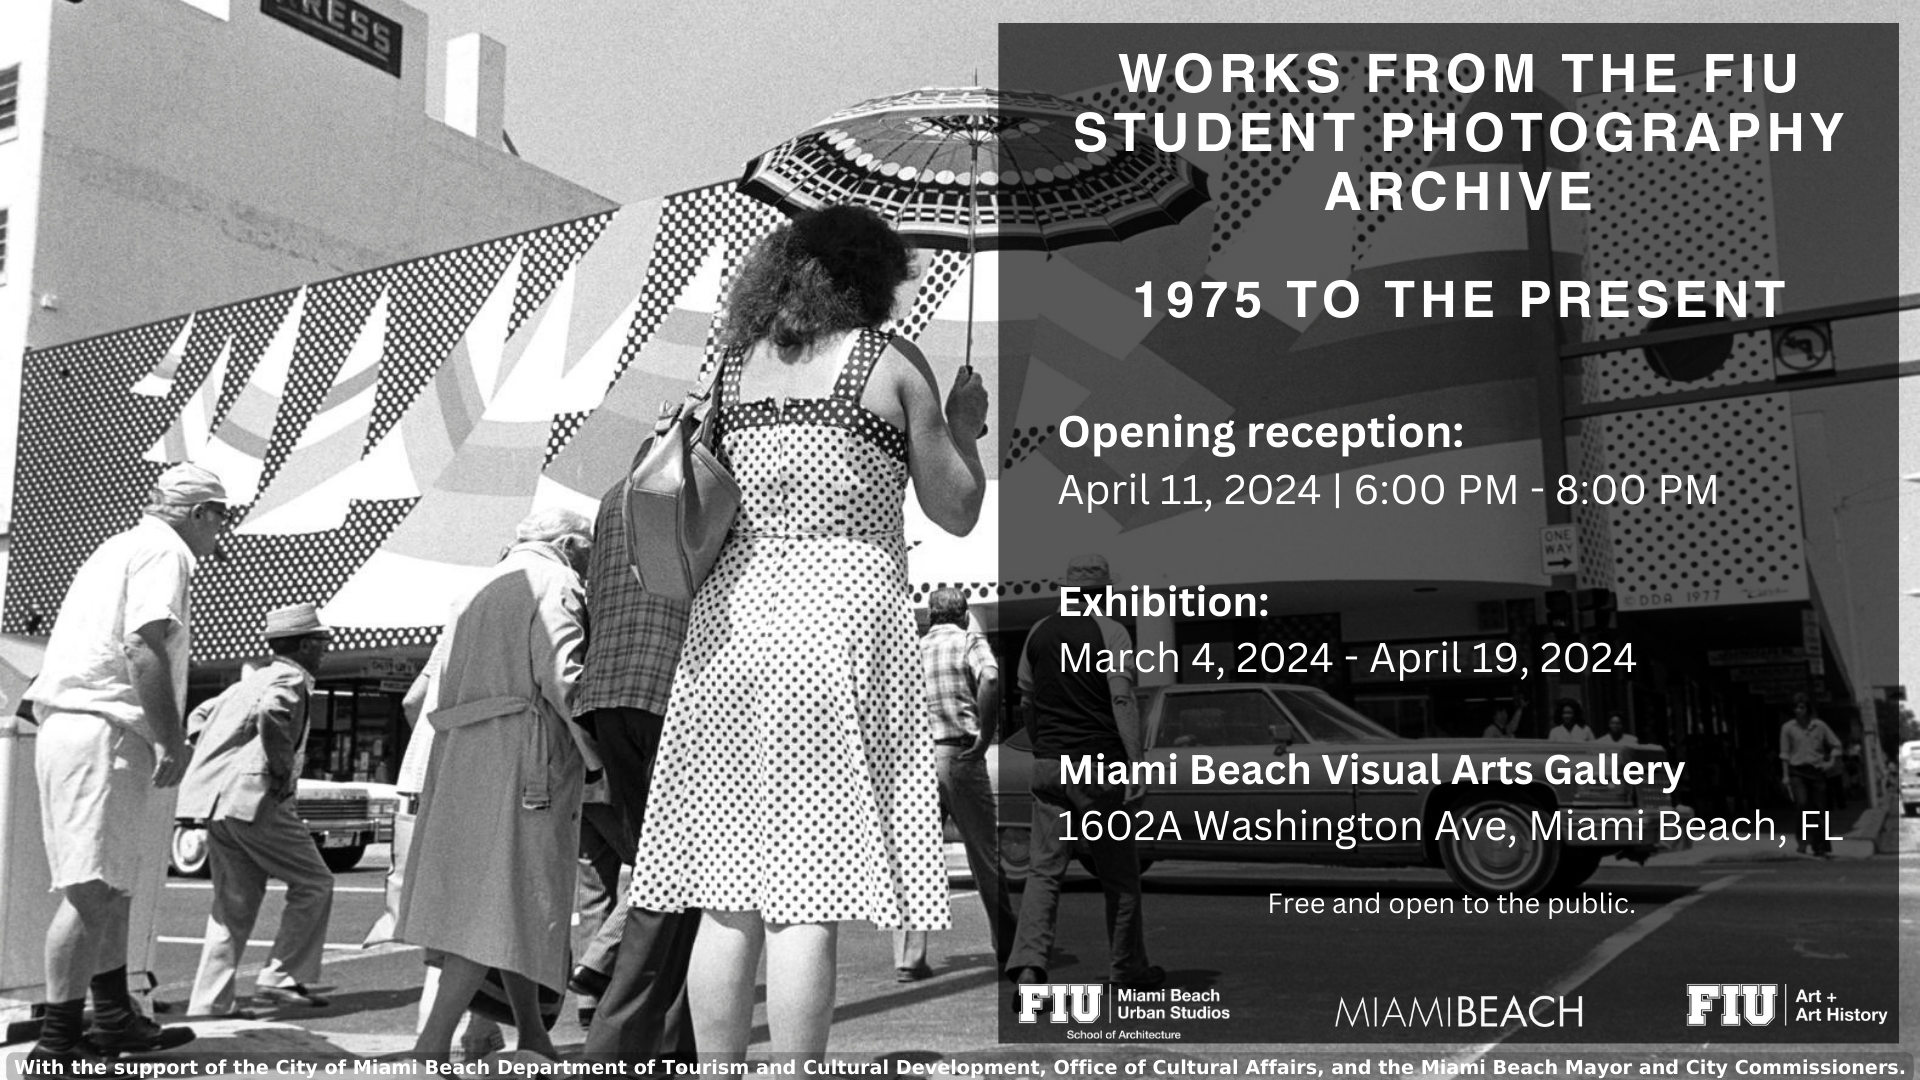 FIU Student Photography Archive flyer (1)